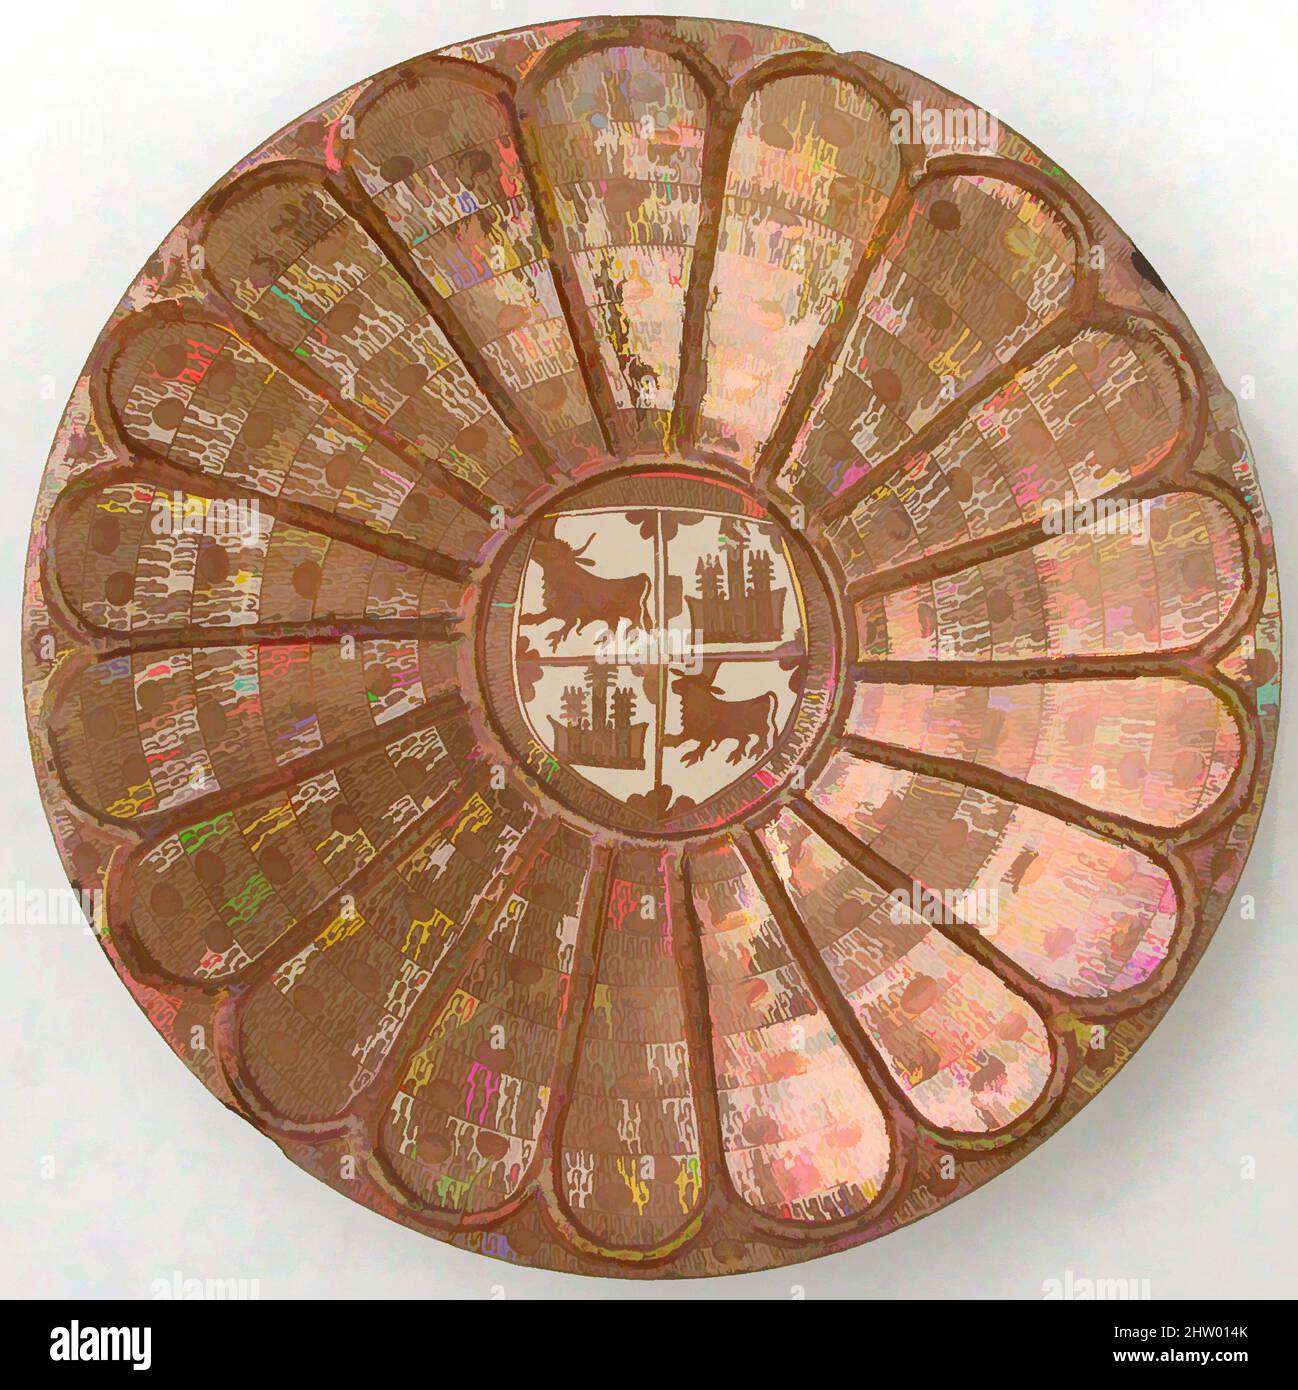 Art inspired by Plate, 1470–1490, Made in probably Manises, Valencia, Spain, Spanish, Tin-glazed earthenware, Overall: 2 15/16 x 17 in. (7.5 x 43.2 cm), Ceramics, Classic works modernized by Artotop with a splash of modernity. Shapes, color and value, eye-catching visual impact on art. Emotions through freedom of artworks in a contemporary way. A timeless message pursuing a wildly creative new direction. Artists turning to the digital medium and creating the Artotop NFT Stock Photo